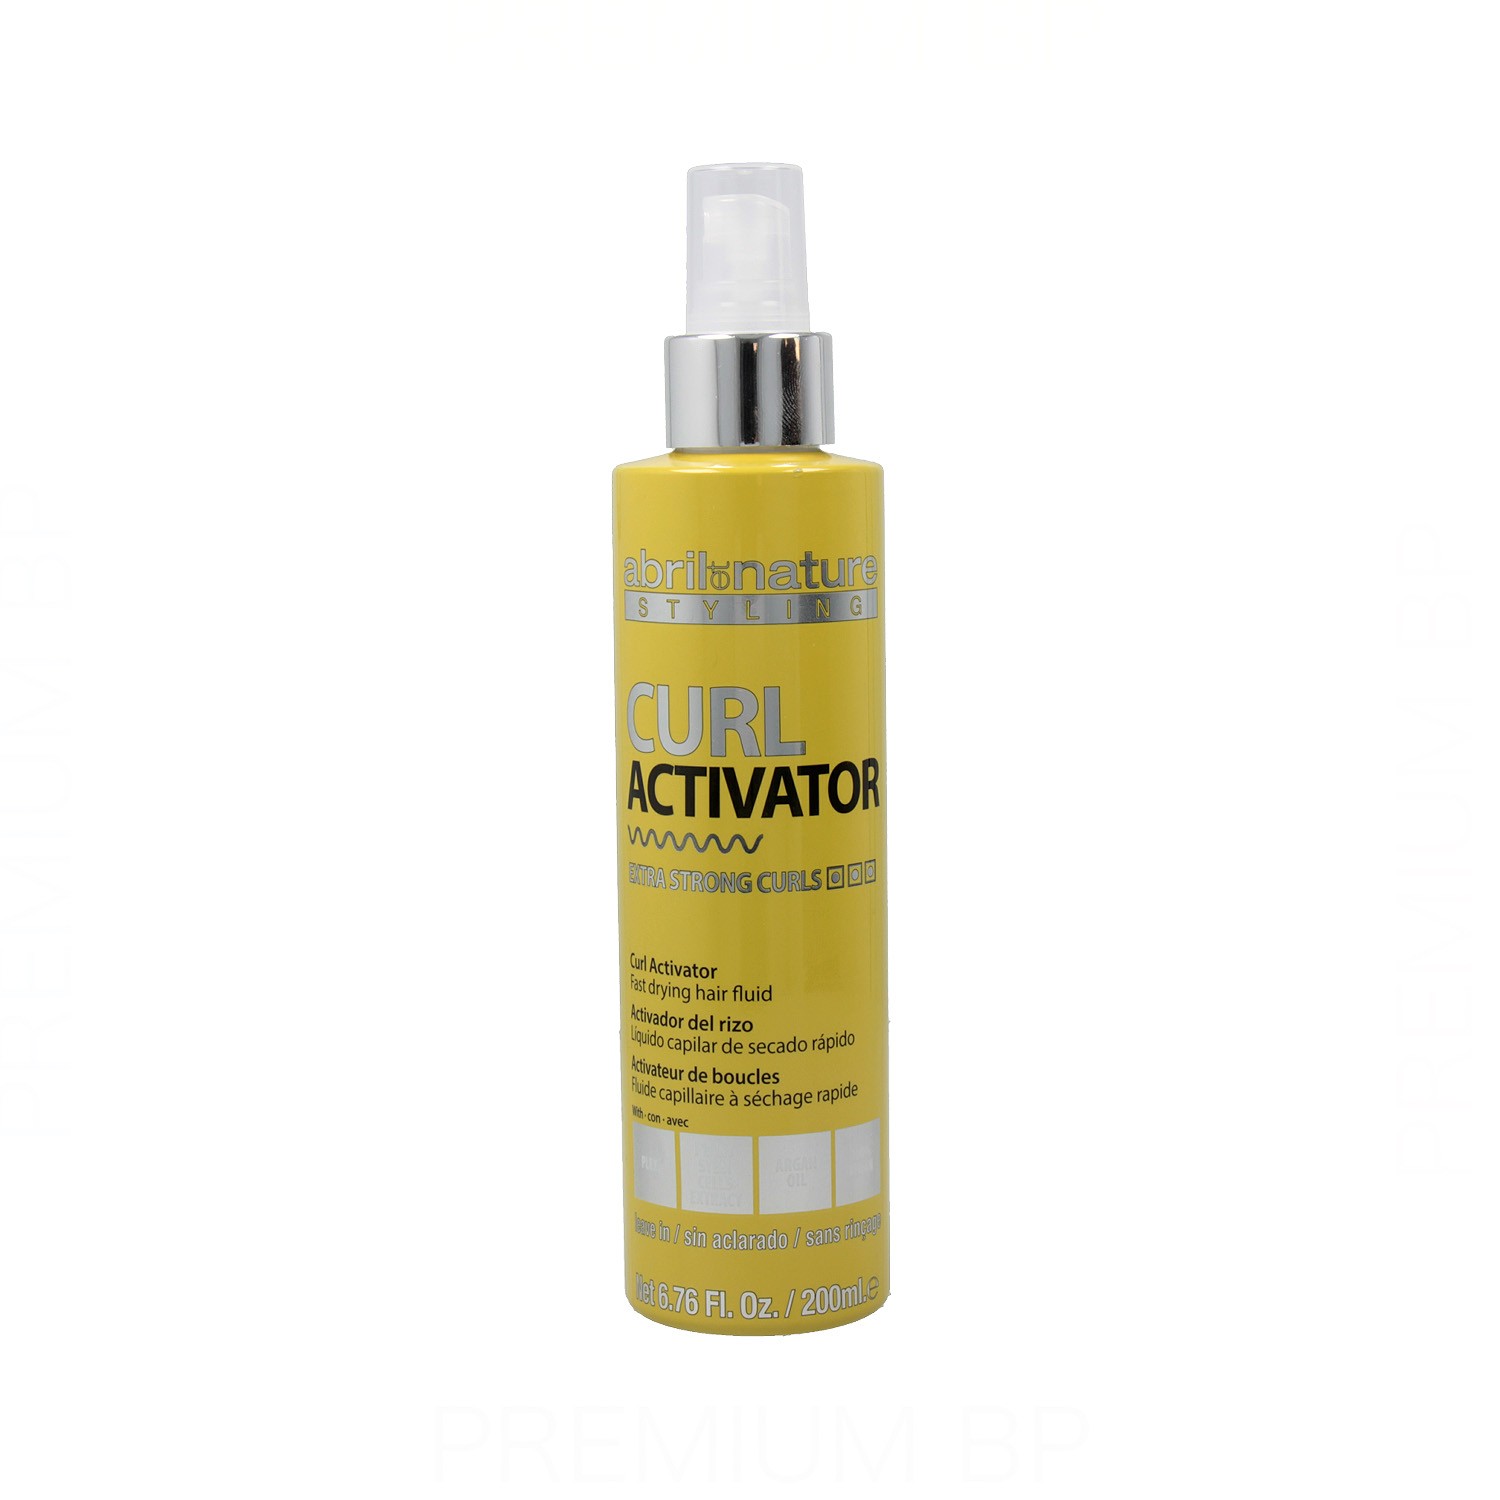 Abril Nature Curl Activator Extra Strong Curls Curl Activator 200 ml